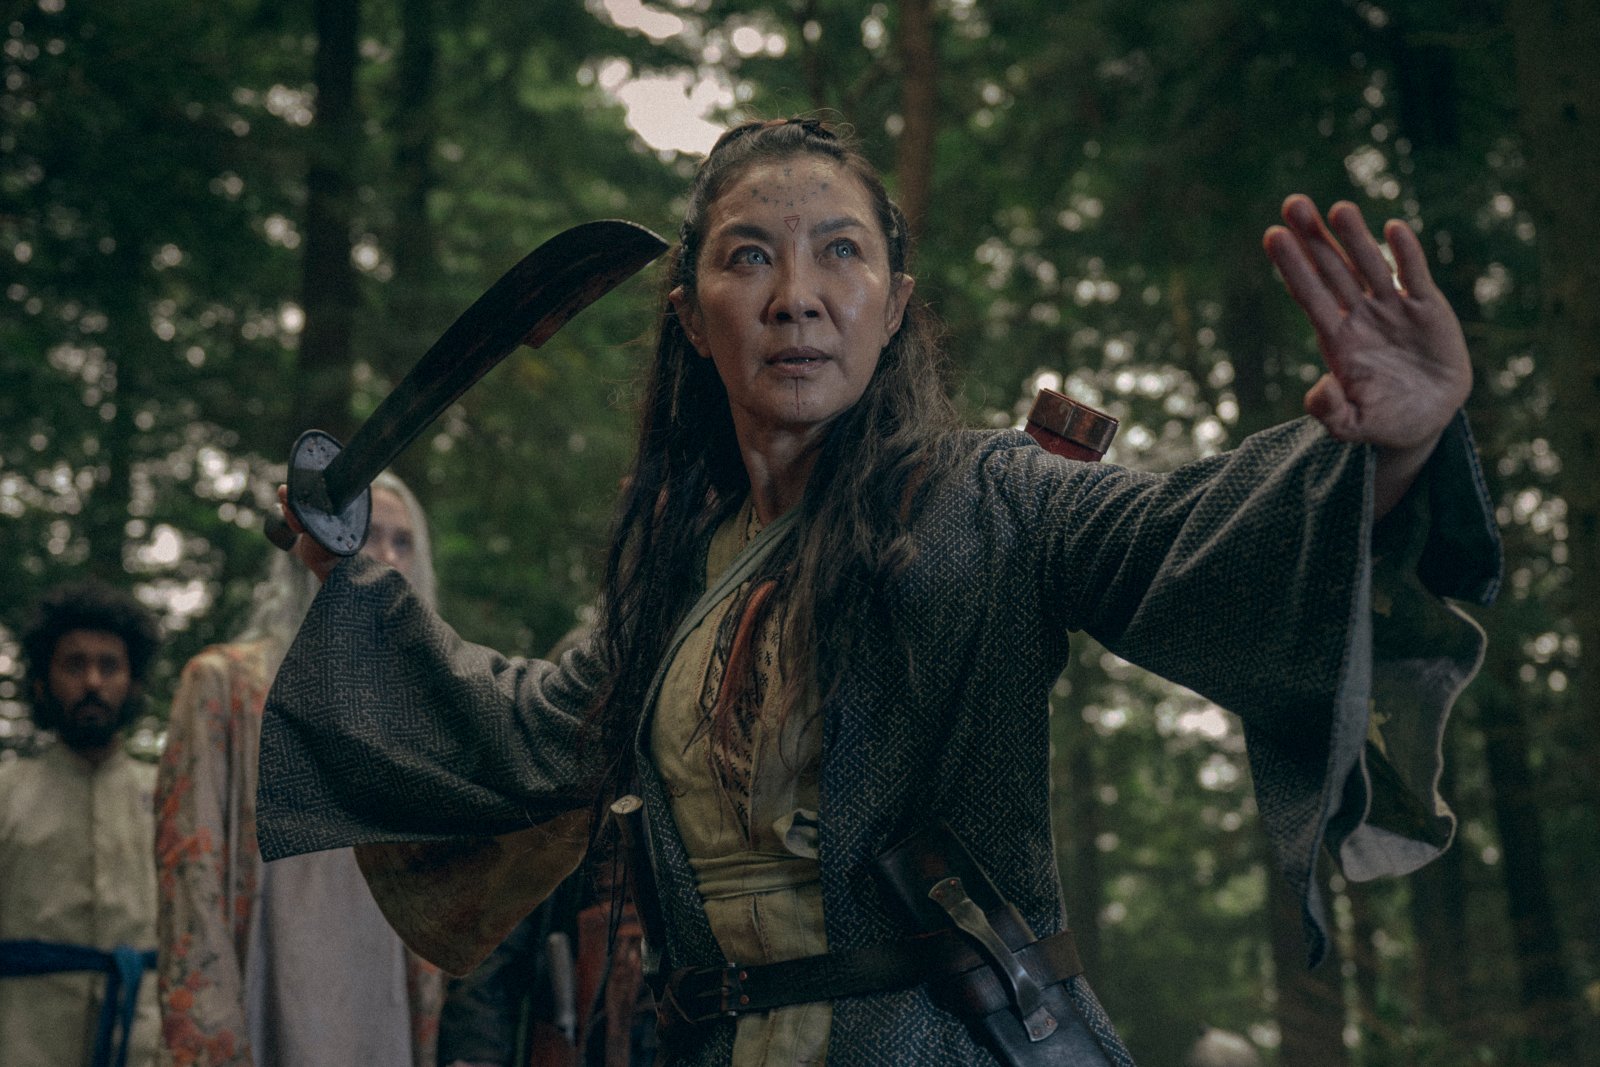 Michelle Yeoh in 'The Witcher: Blood Origin' for our article about its release time on Netflix. She's holding a sword and readying herself to fight.